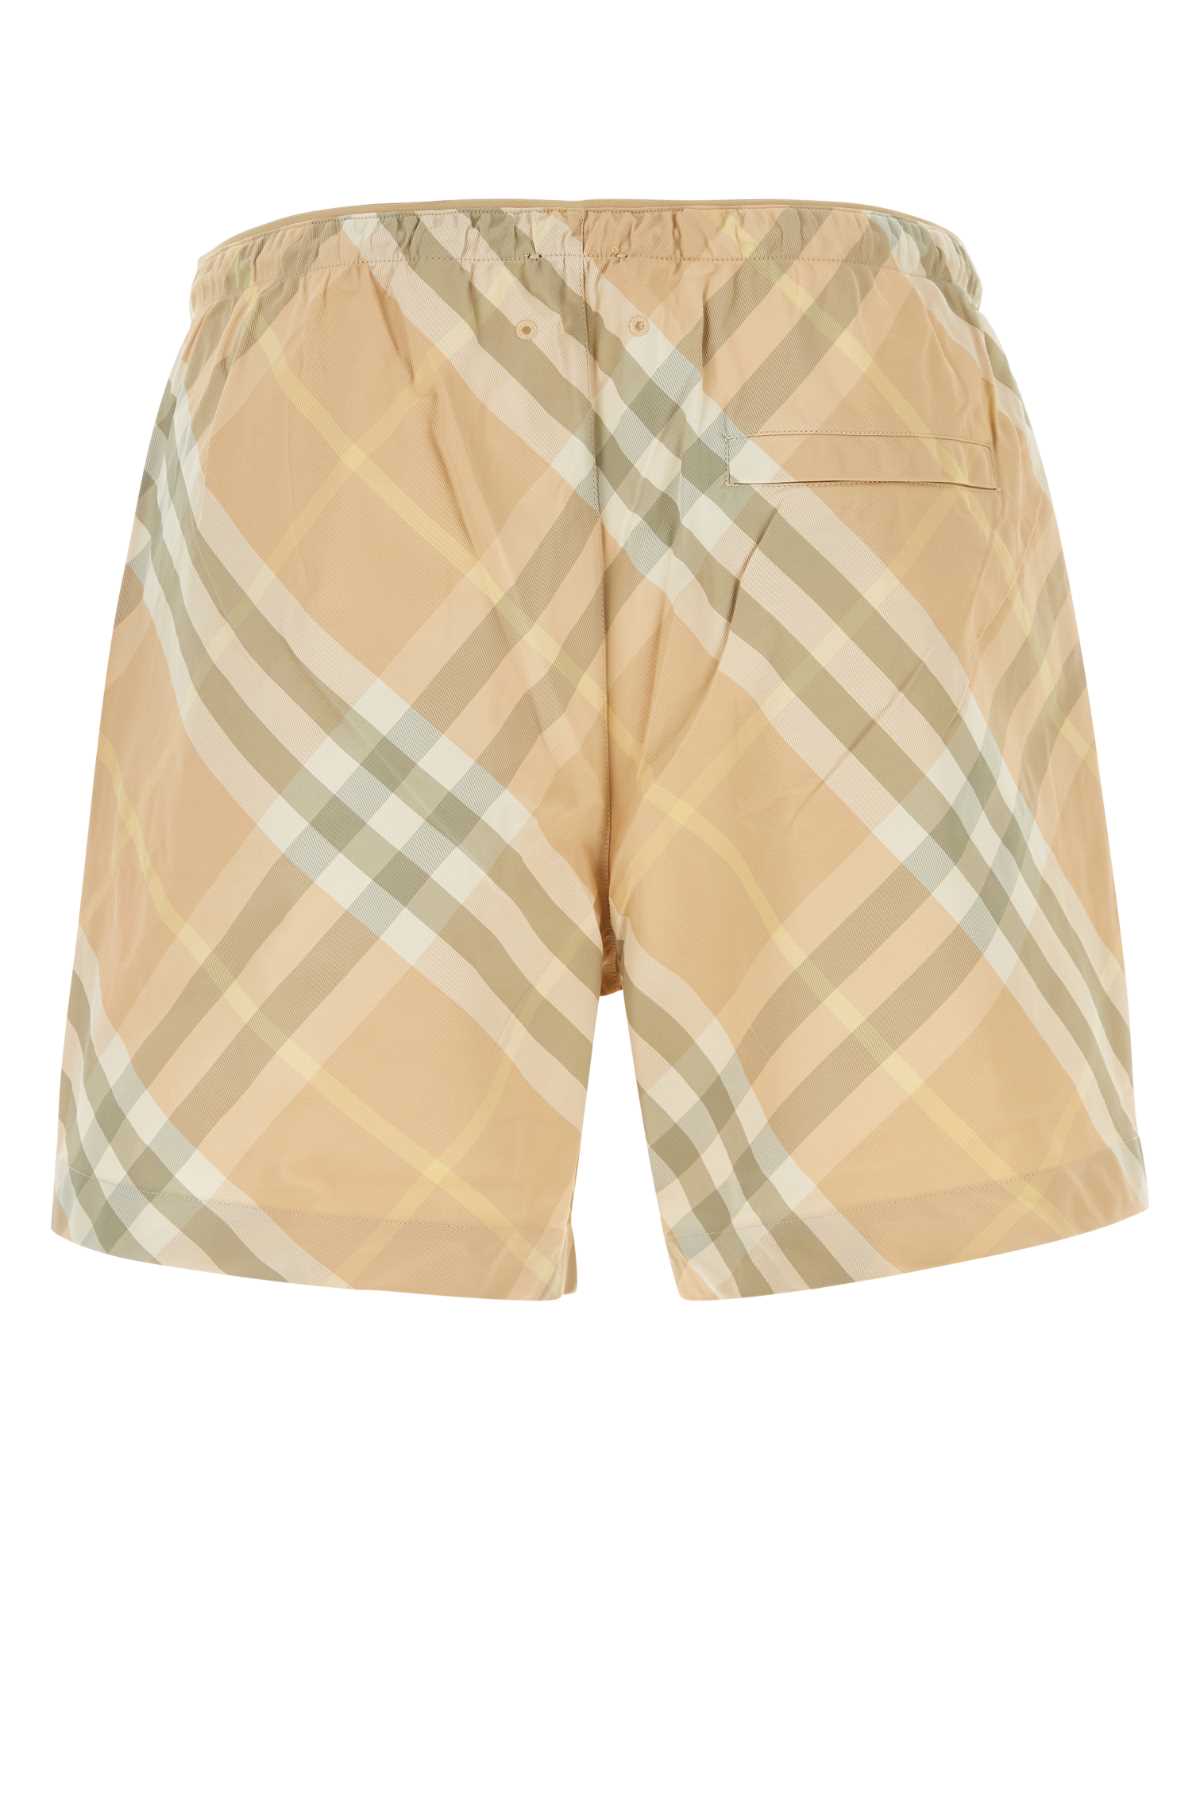 BURBERRY EMBROIDERED NYLON SWIMMING SHORTS